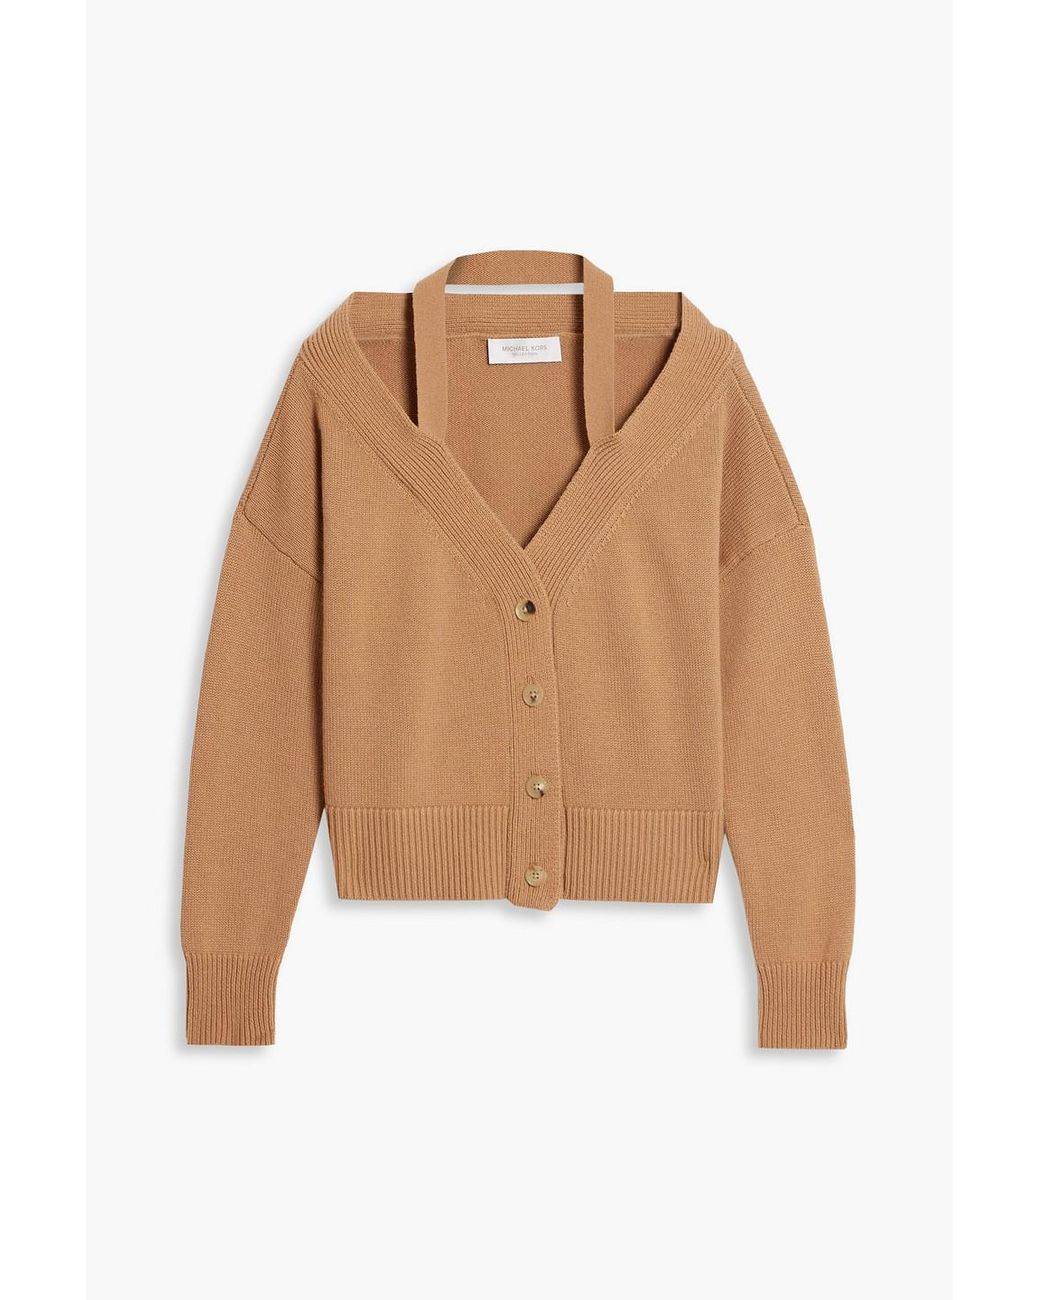 Michael Kors Off-the-shoulder Cashmere Cardigan in Natural | Lyst